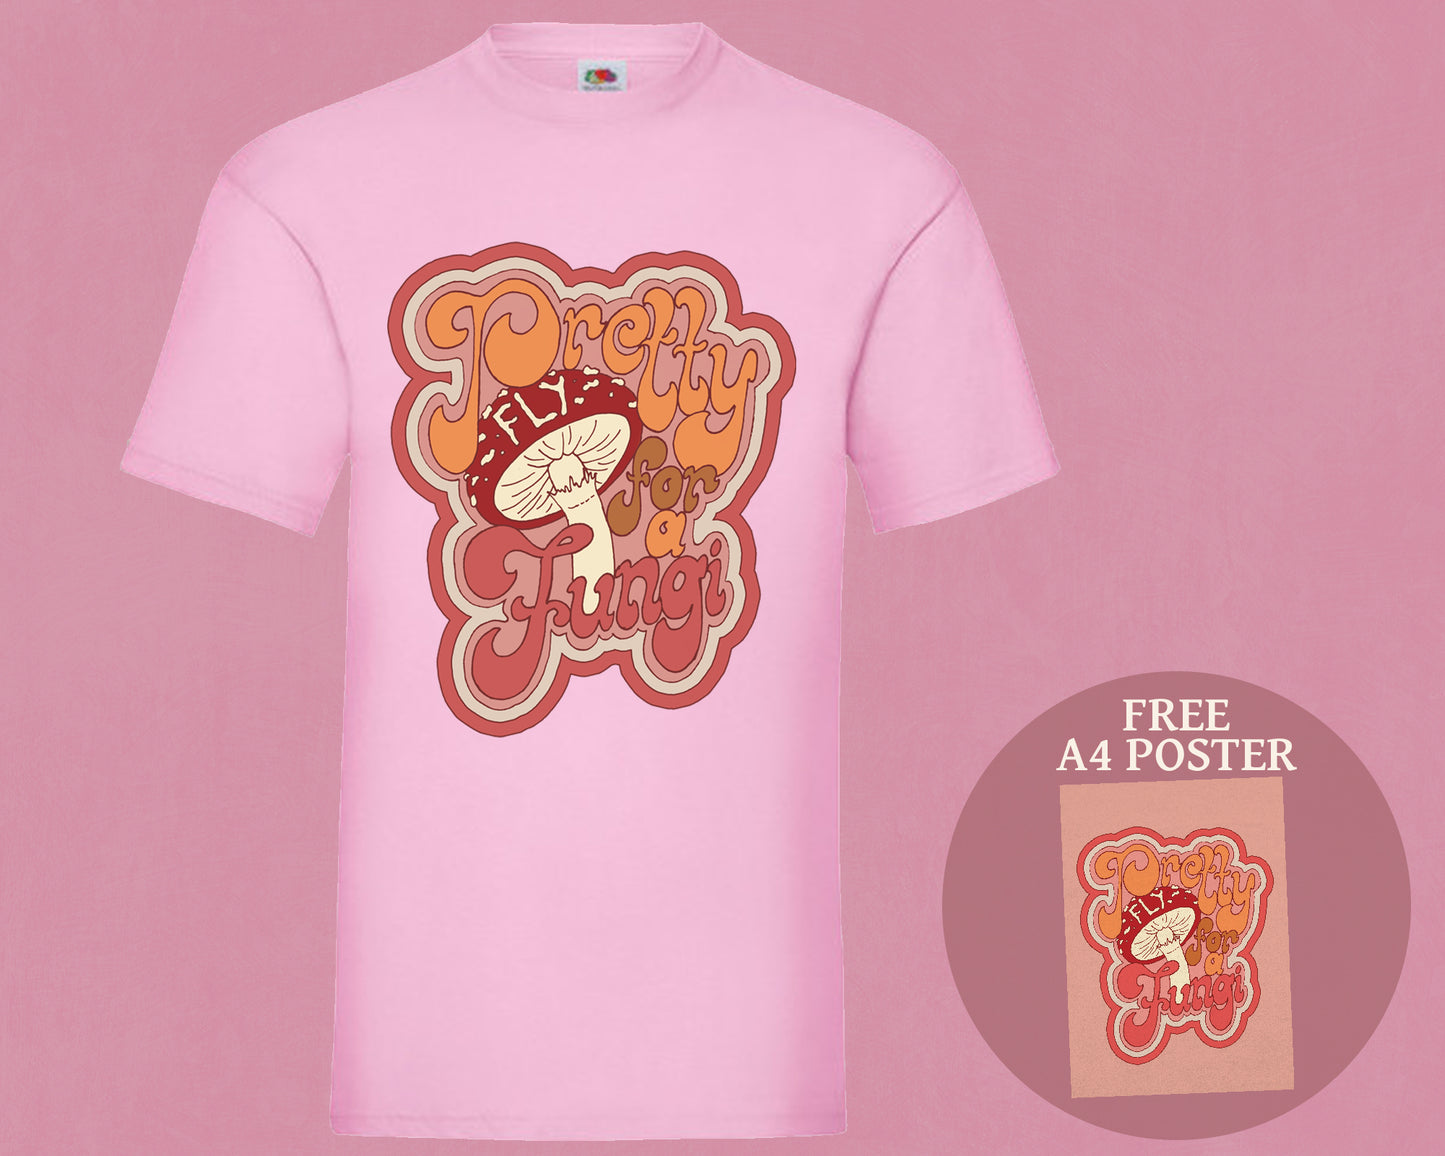 Pretty Fly For A Fungi Unisex T-Shirt - Pink